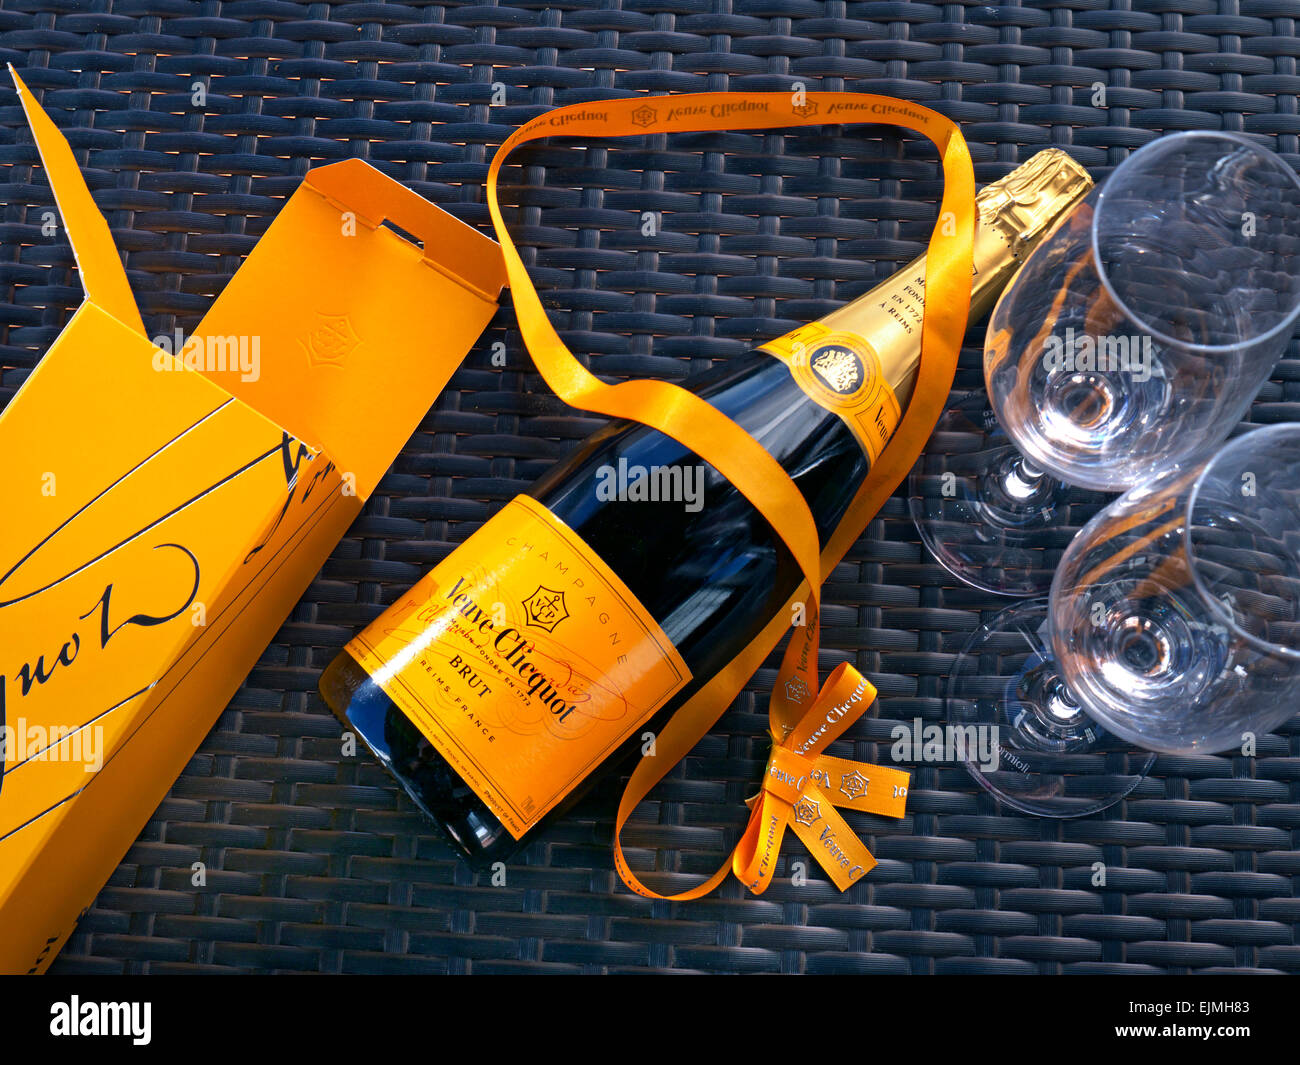 Bottle of Veuve Clicquot luxury Champagne presentation box and glasses on sunny outdoor alfresco wicker table surface Stock Photo